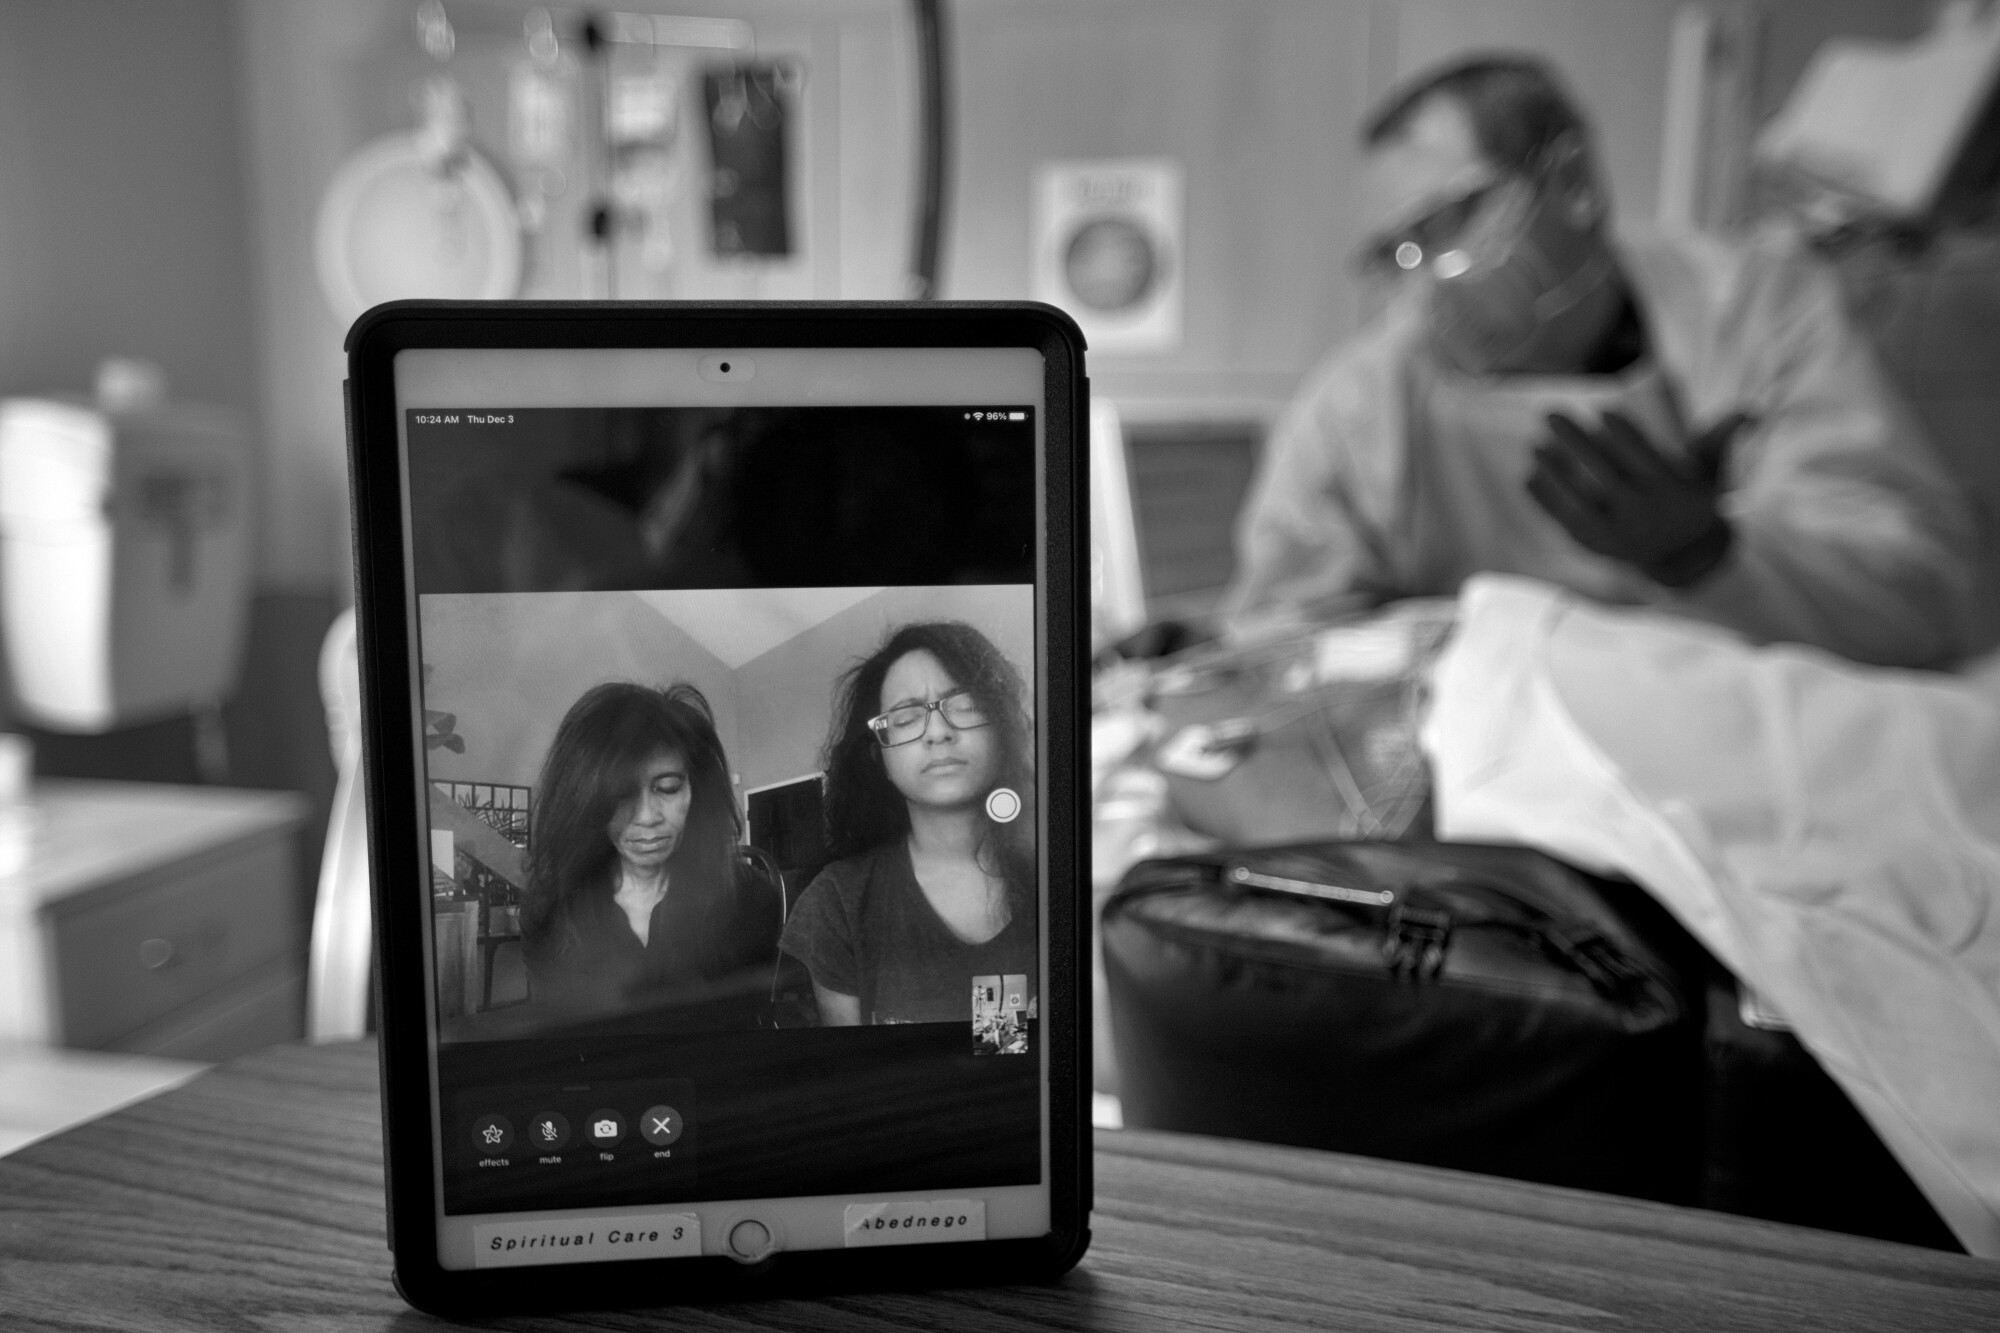 Two people chat by video on an iPad as Chaplain Kevin, at right in background, prays over a patient